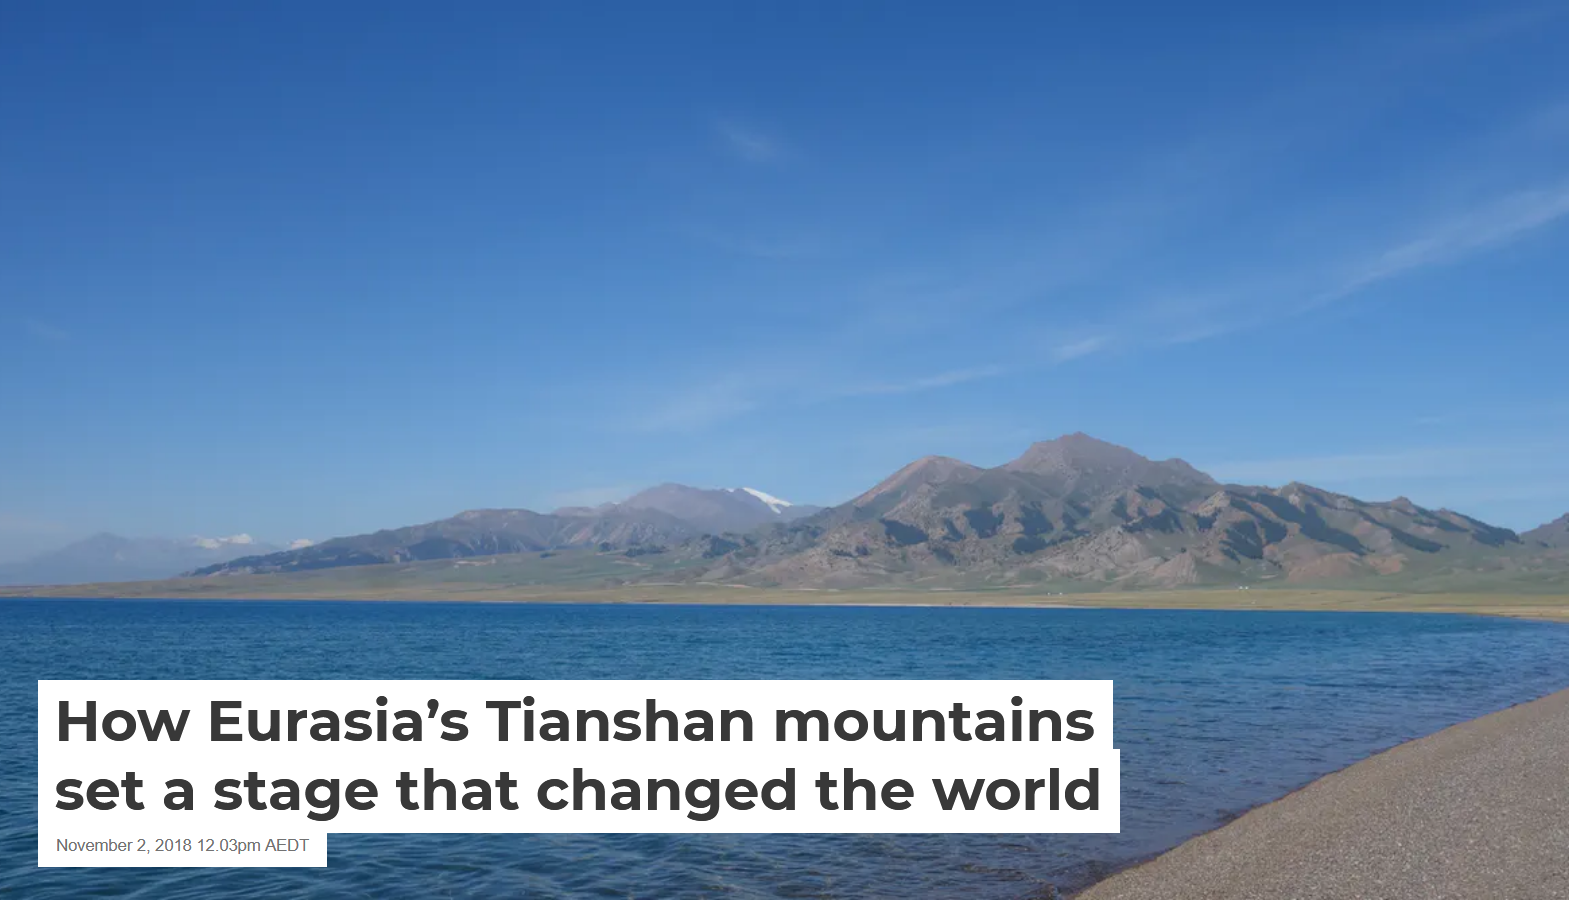 How Eurasia's Tianshan mountains set a stage that changed the world